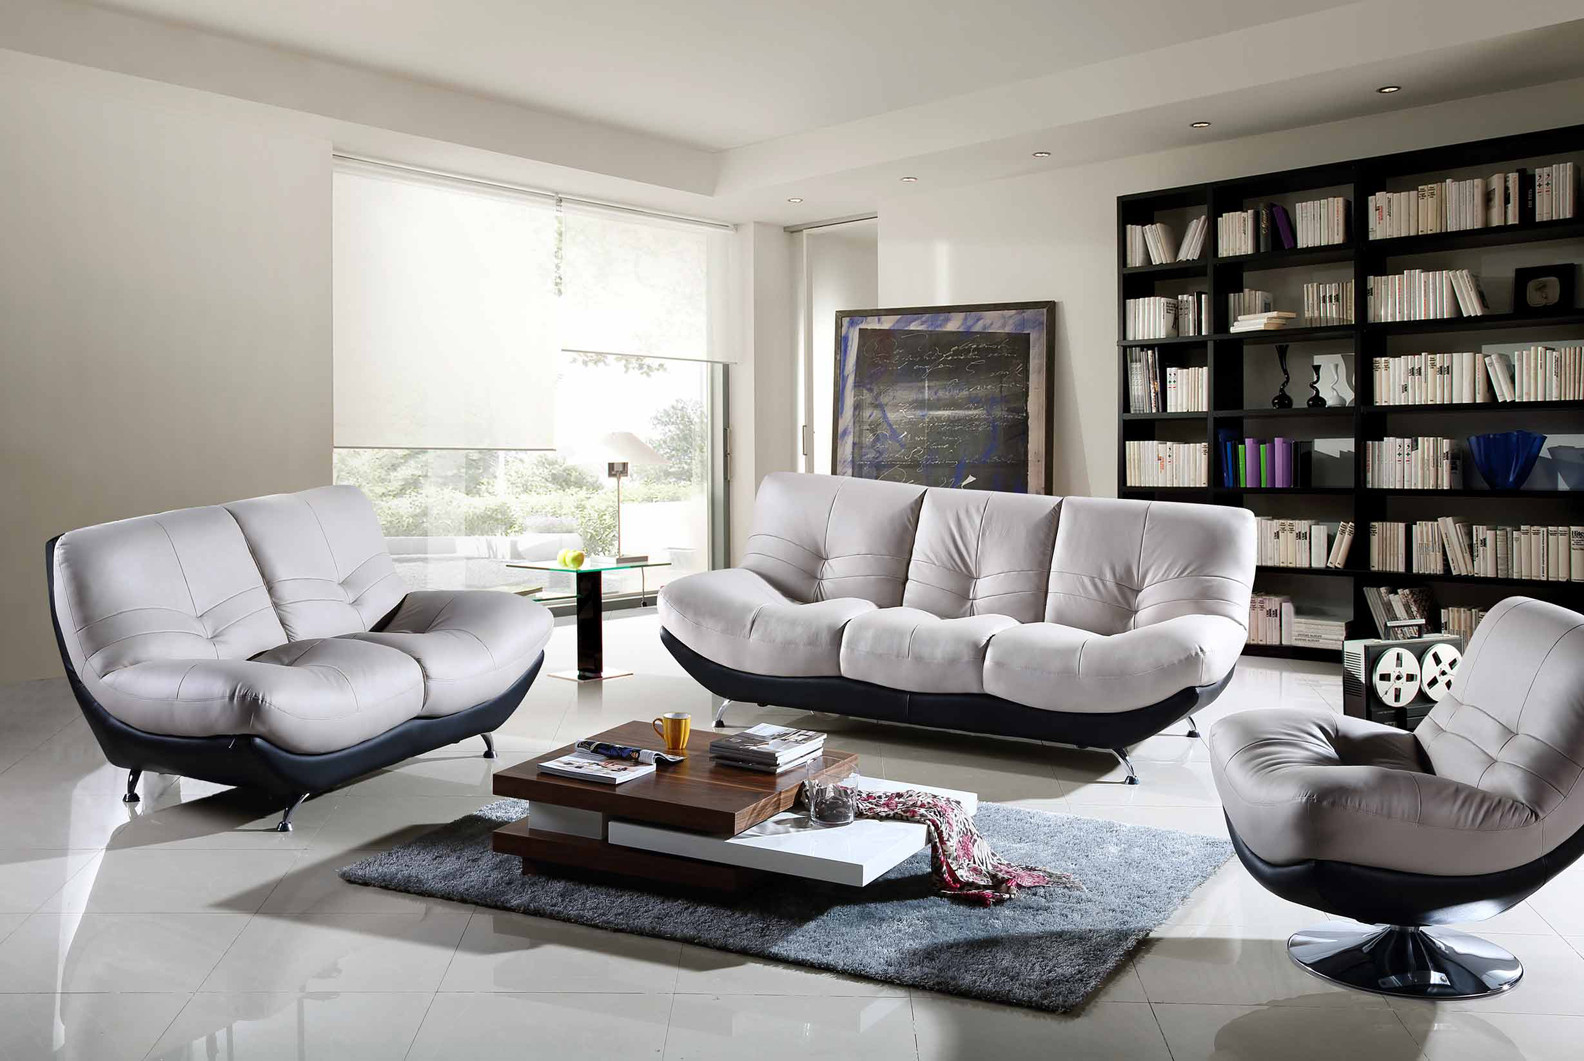 Modern Living Room Sets Cheap
 11 Genius Initiatives of How to Improve Living Room Sets